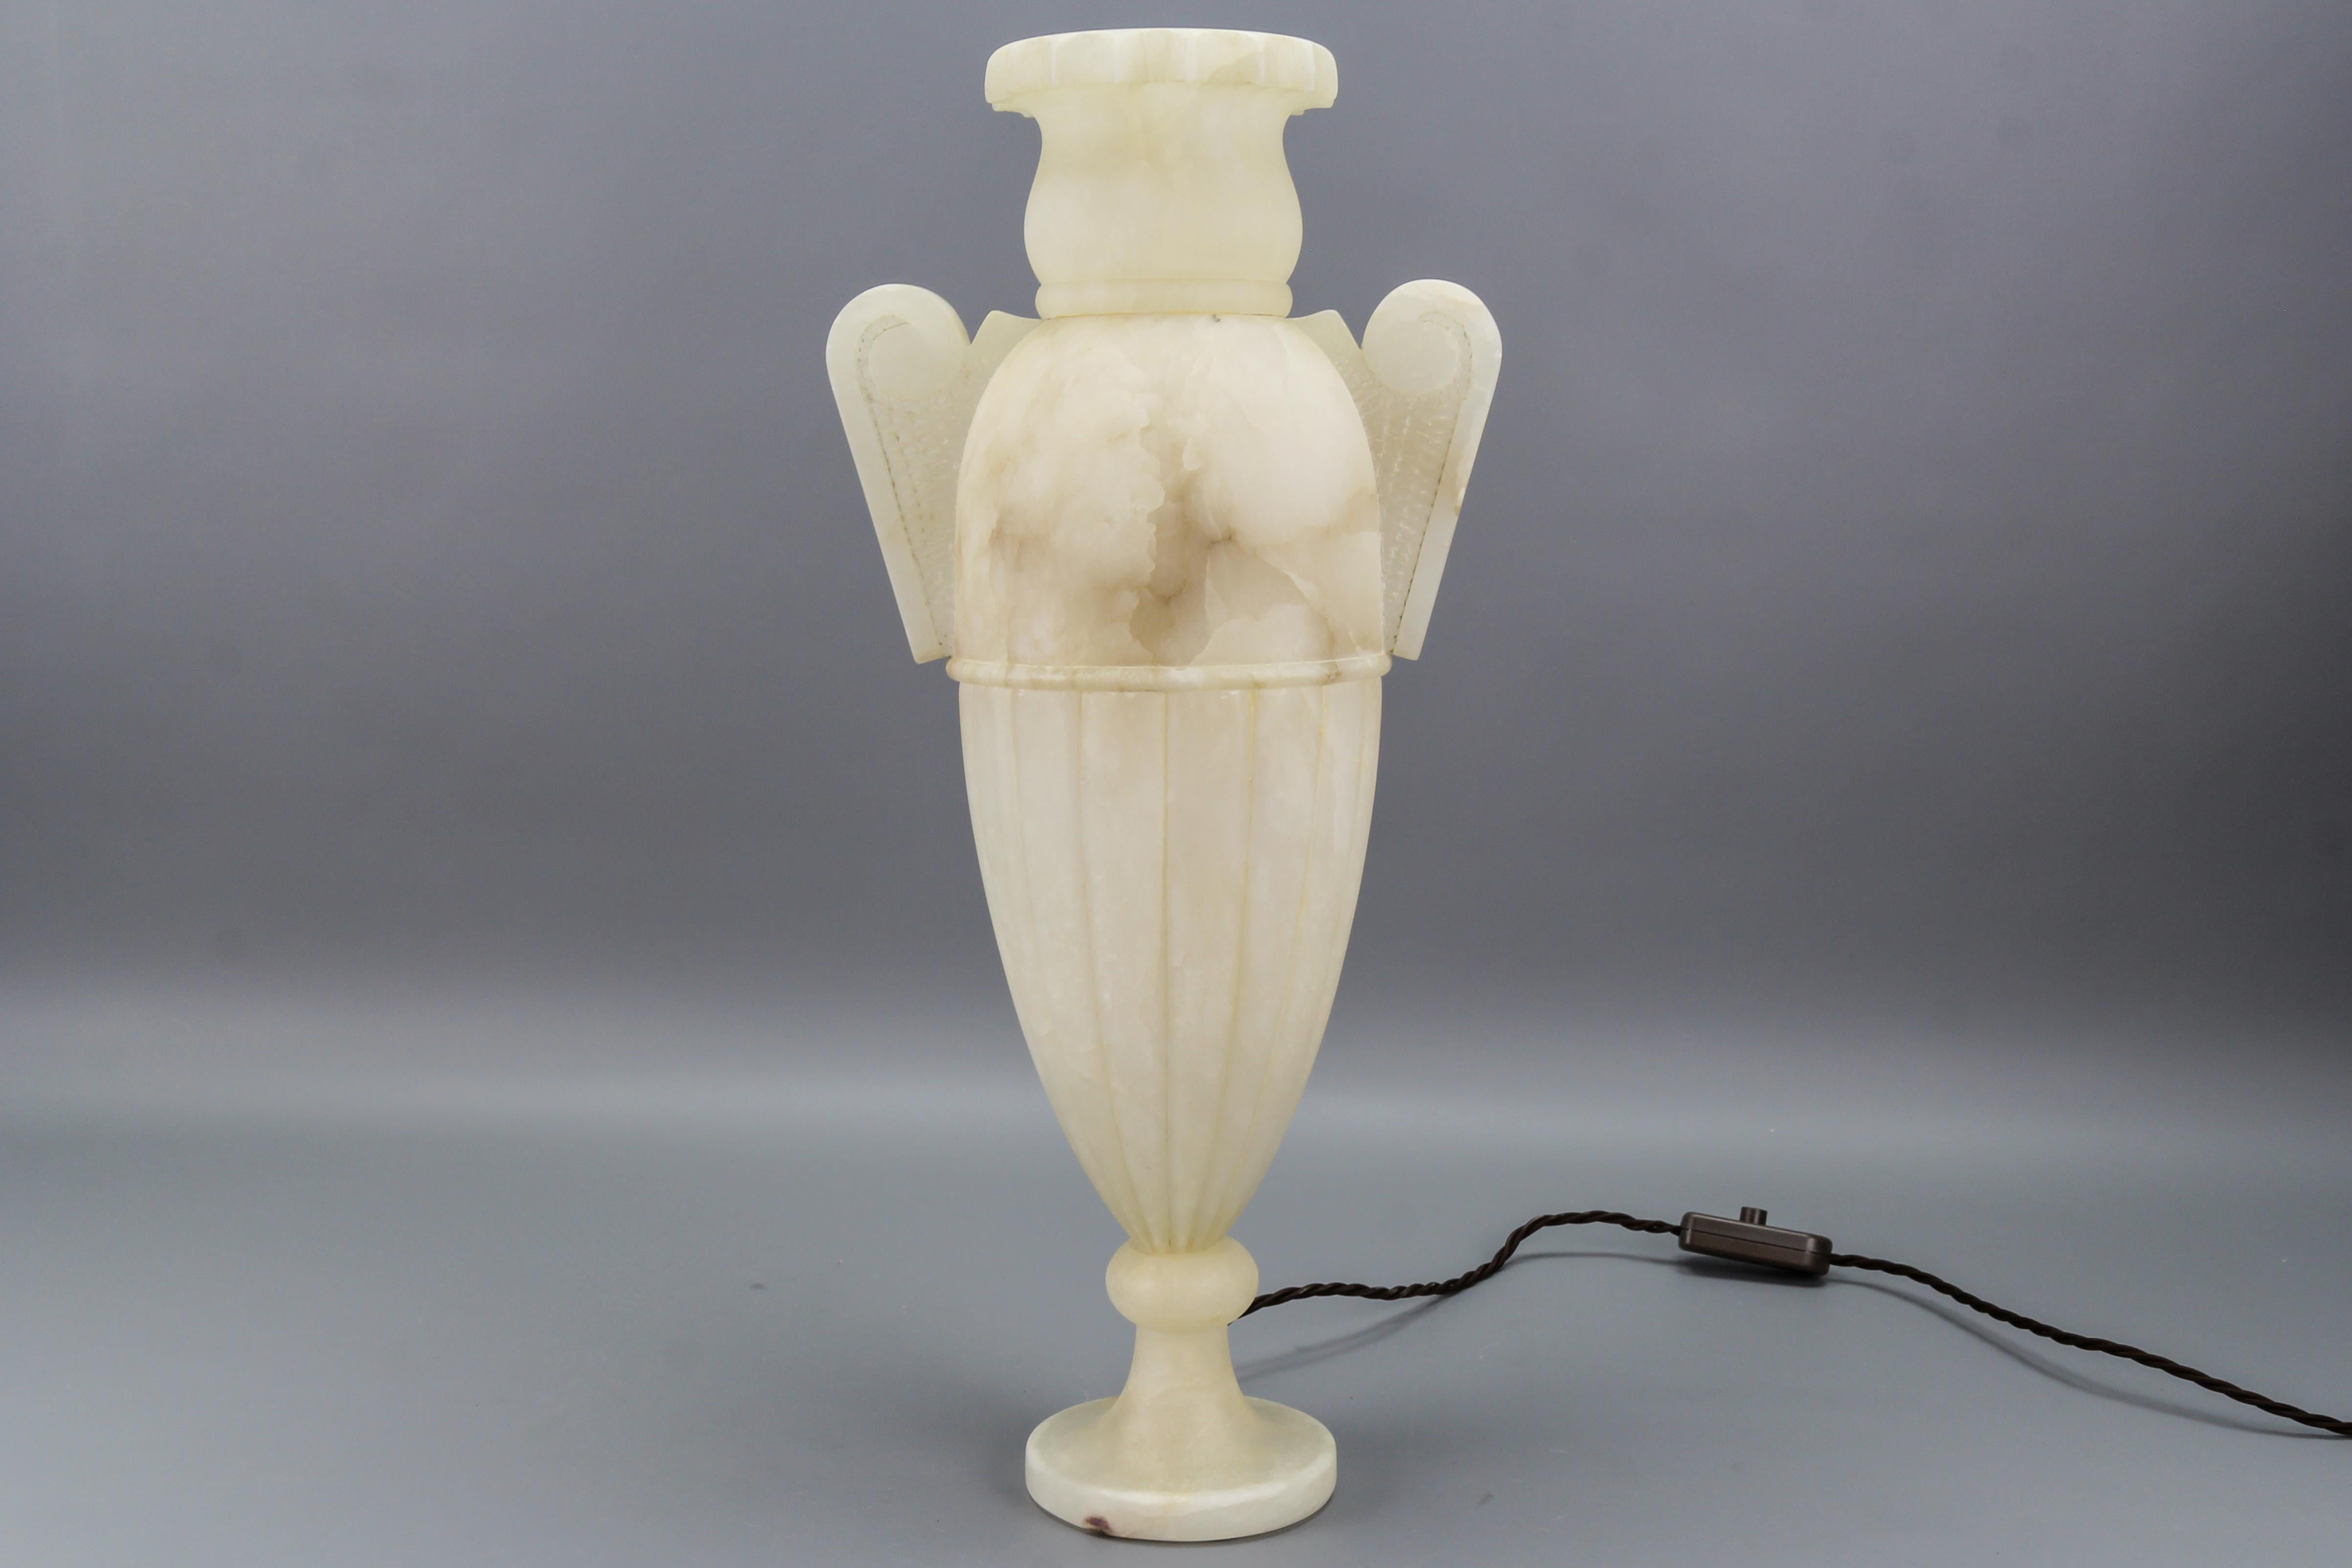 Neoclassical style amphora-shaped ivory and light brown veined alabaster lamp, Italy, circa the 1930s.
Impressive Italian Neoclassical style amphora-shaped lamp made of beautifully veined alabaster. The lamp lits from within and the light shining